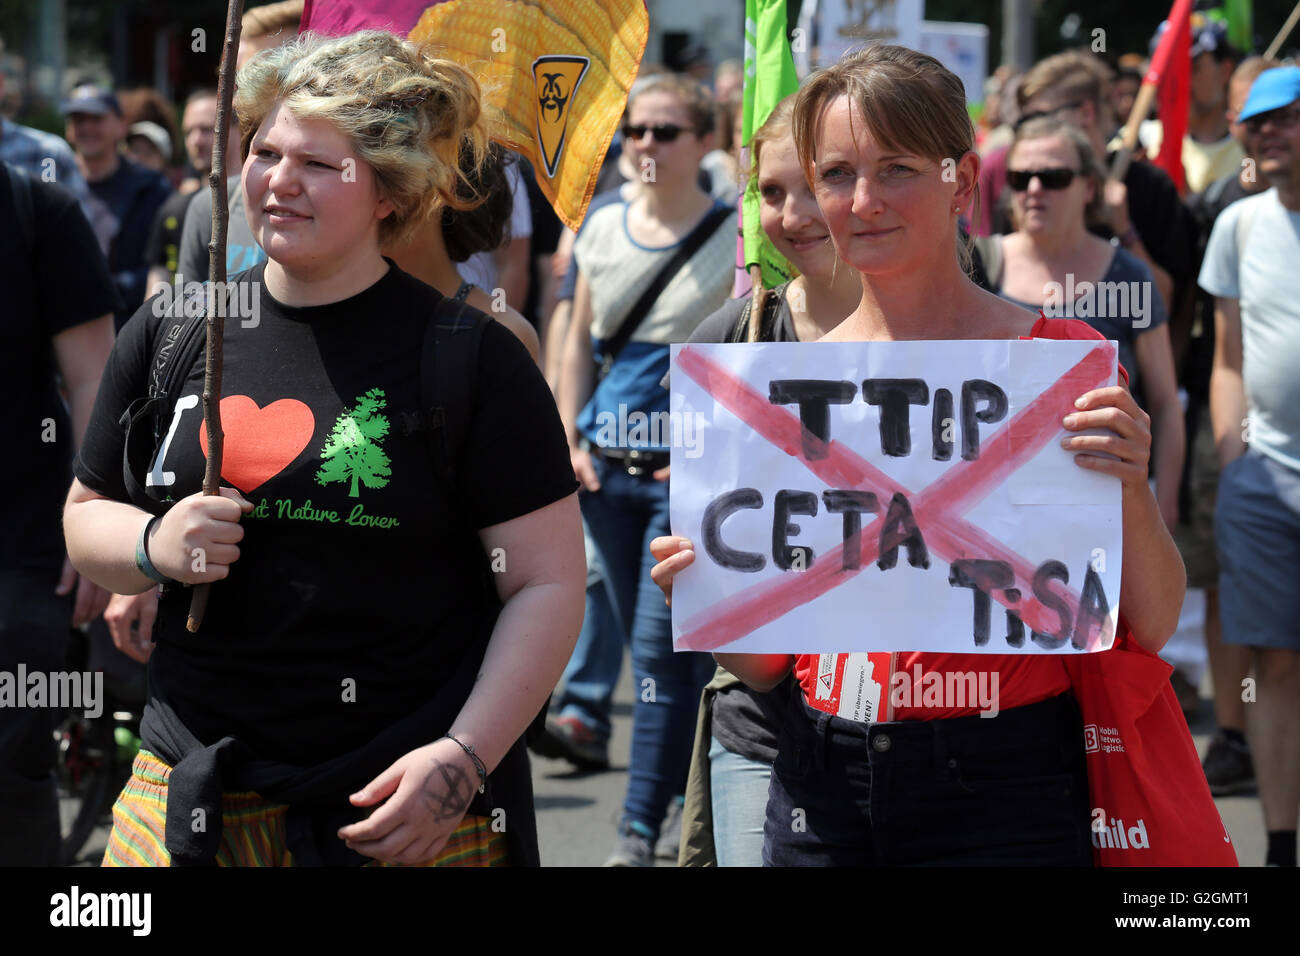 Campaigners against TTIP (Transatlantic Trade and Investment Partnership) hold banner during a demonstration demonstration in Leipzig, Germany, May 2016 Stock Photo